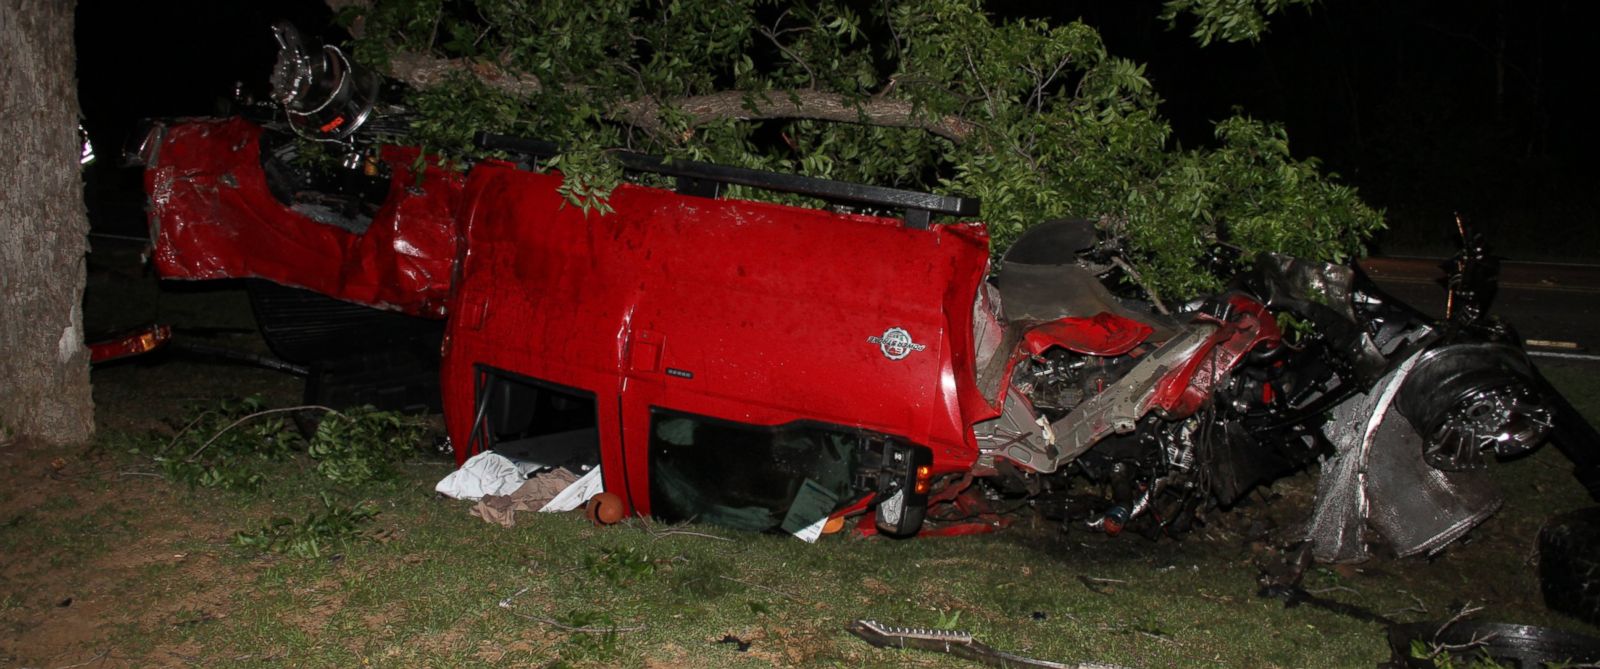 PHOTO: Ethan Couch and seven other teens piled into this pick-up truck before a fatal crash that left four people dead.